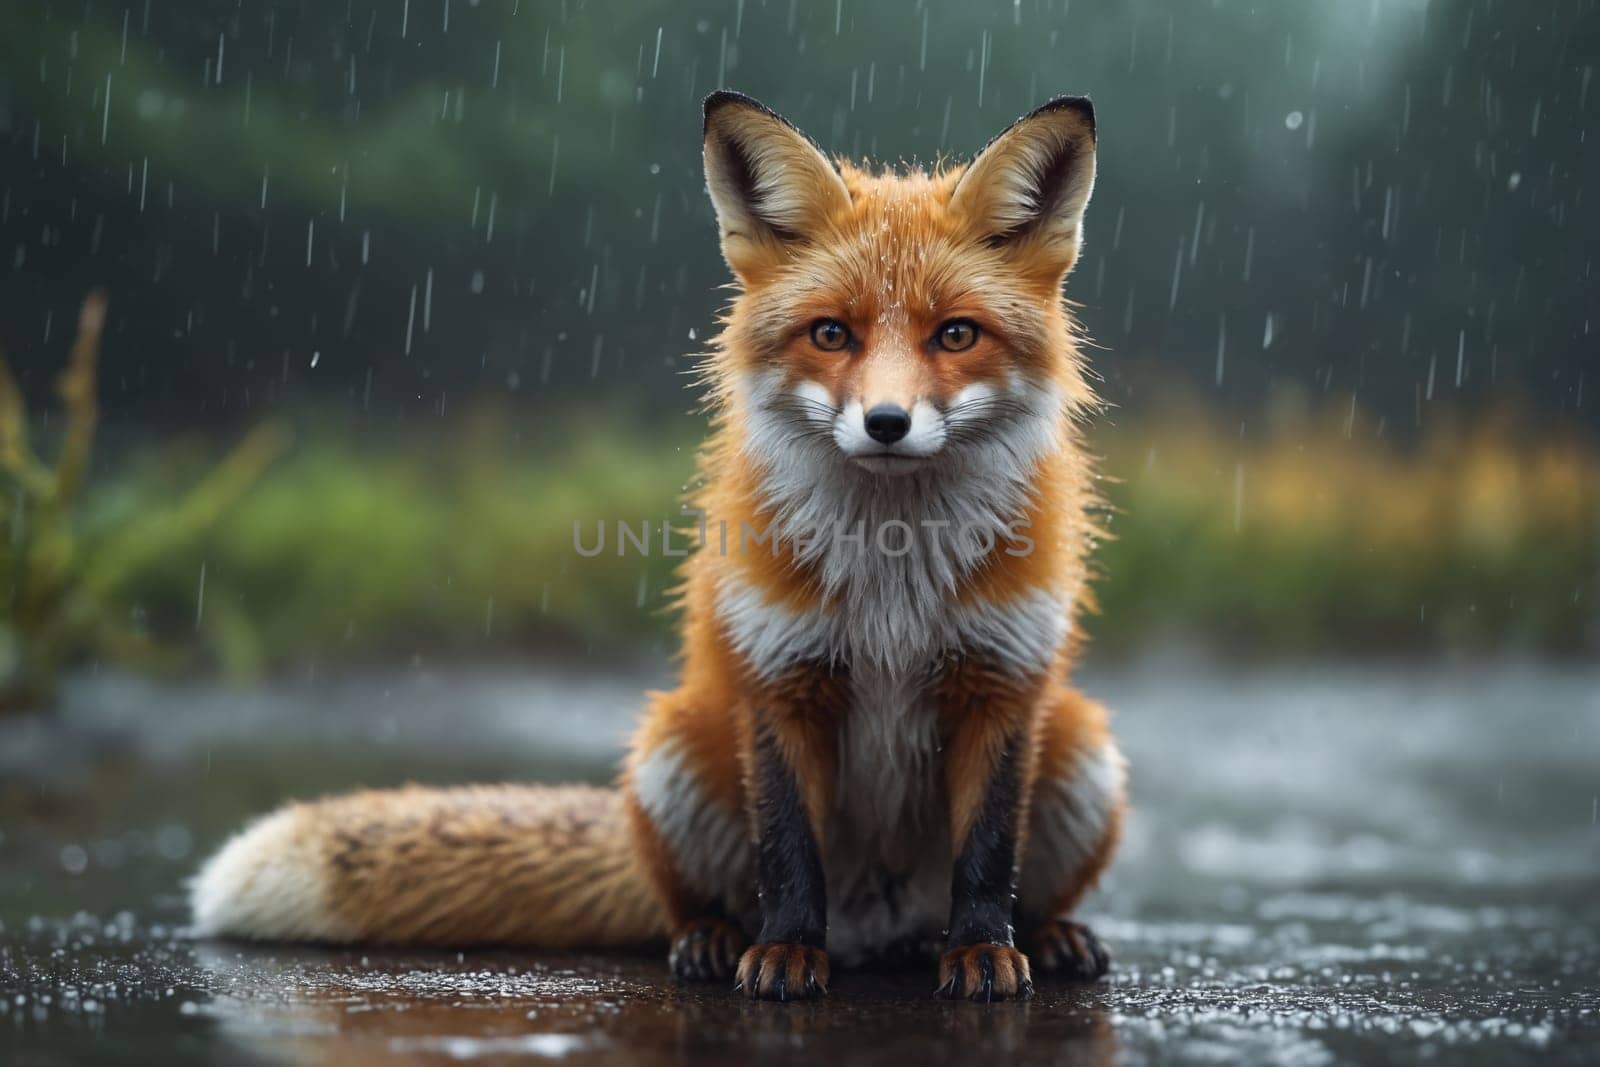 Amid a gentle rainfall, a red fox captures a moment of serene contemplation in the wild.